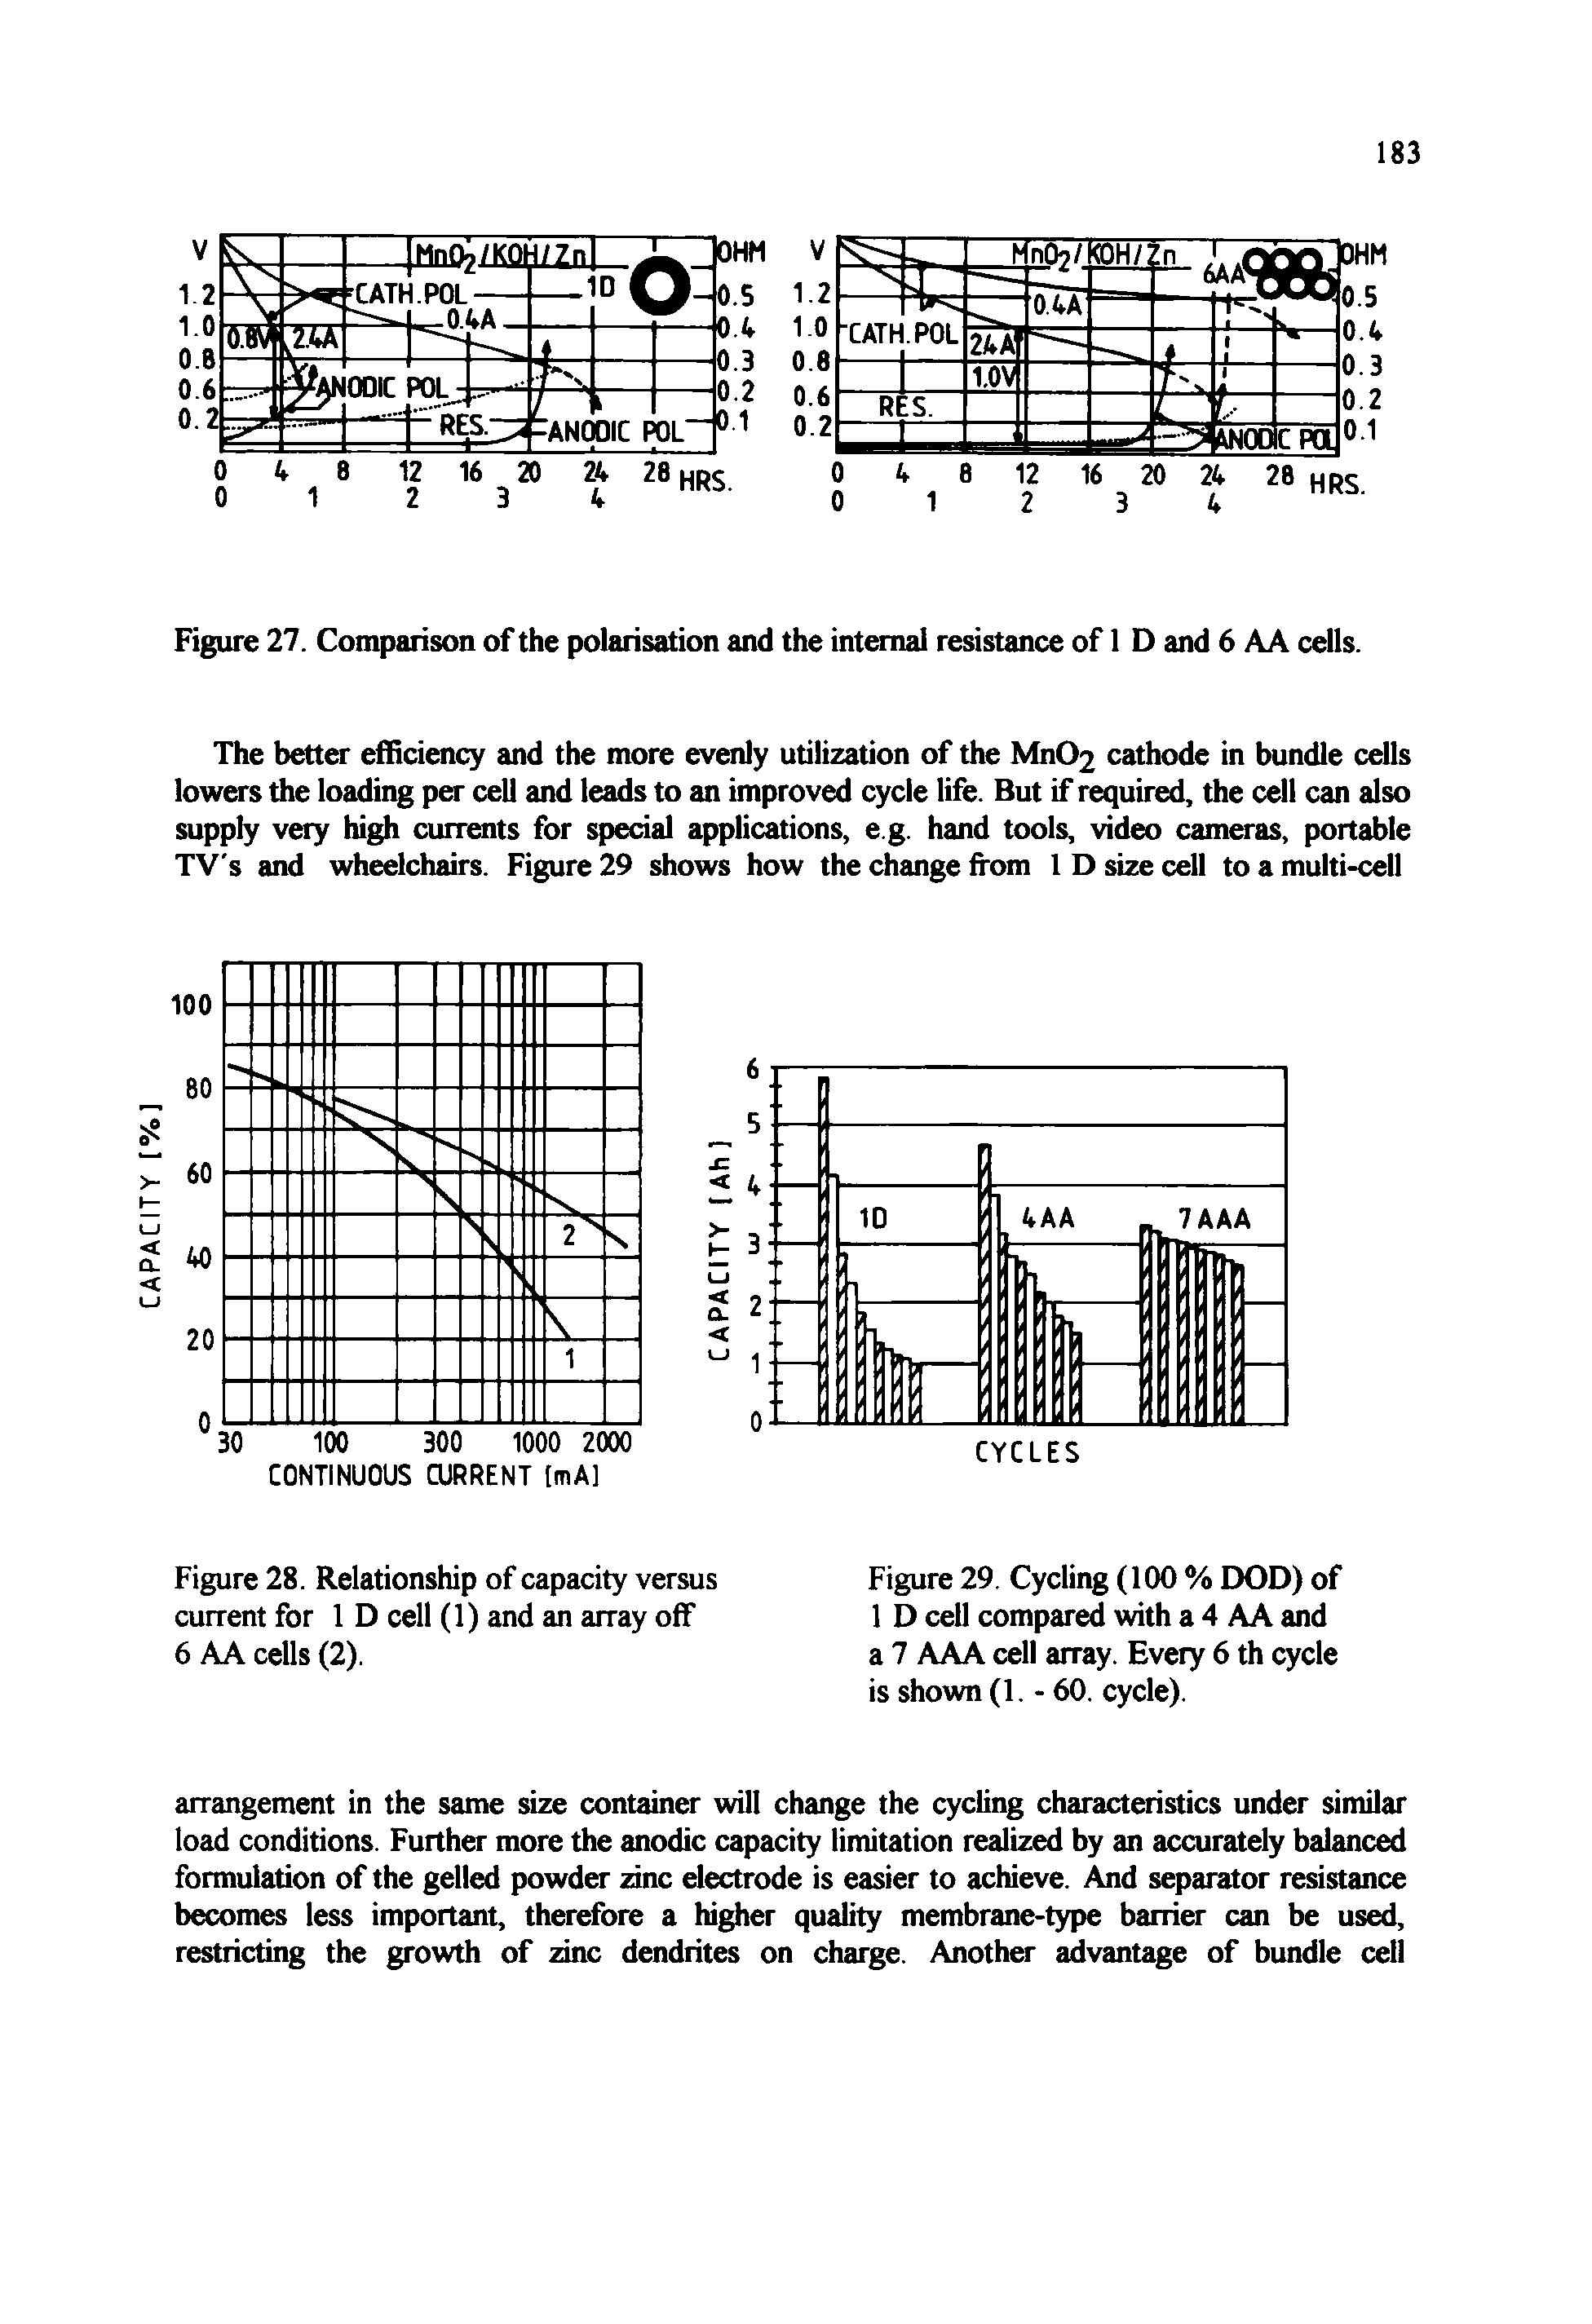 Figure 27. Comparison of the polarisation and the internal resistance of 1 D and 6 AA cells.